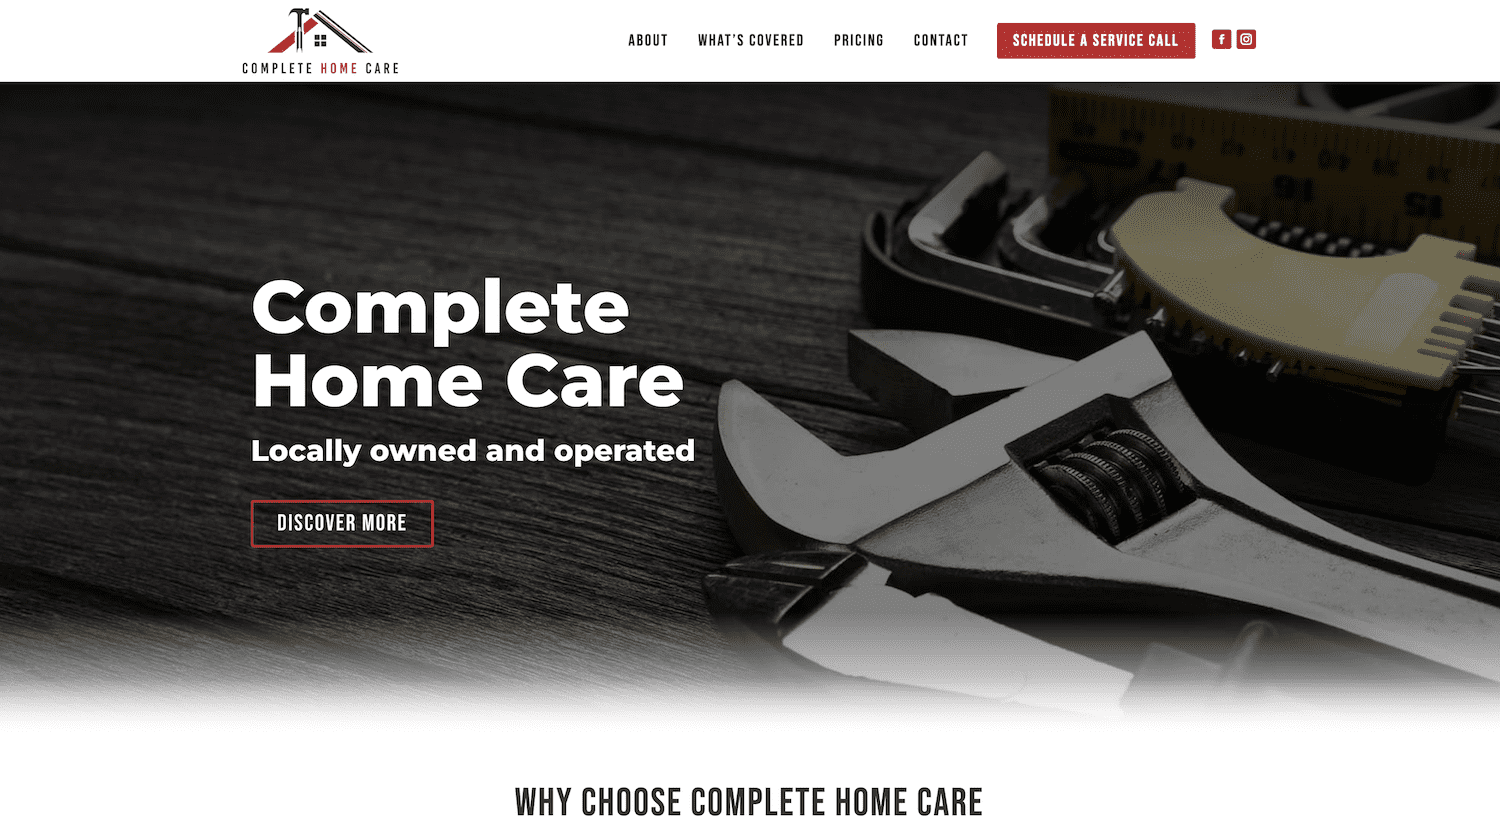 complete home care website design services Dietz Group